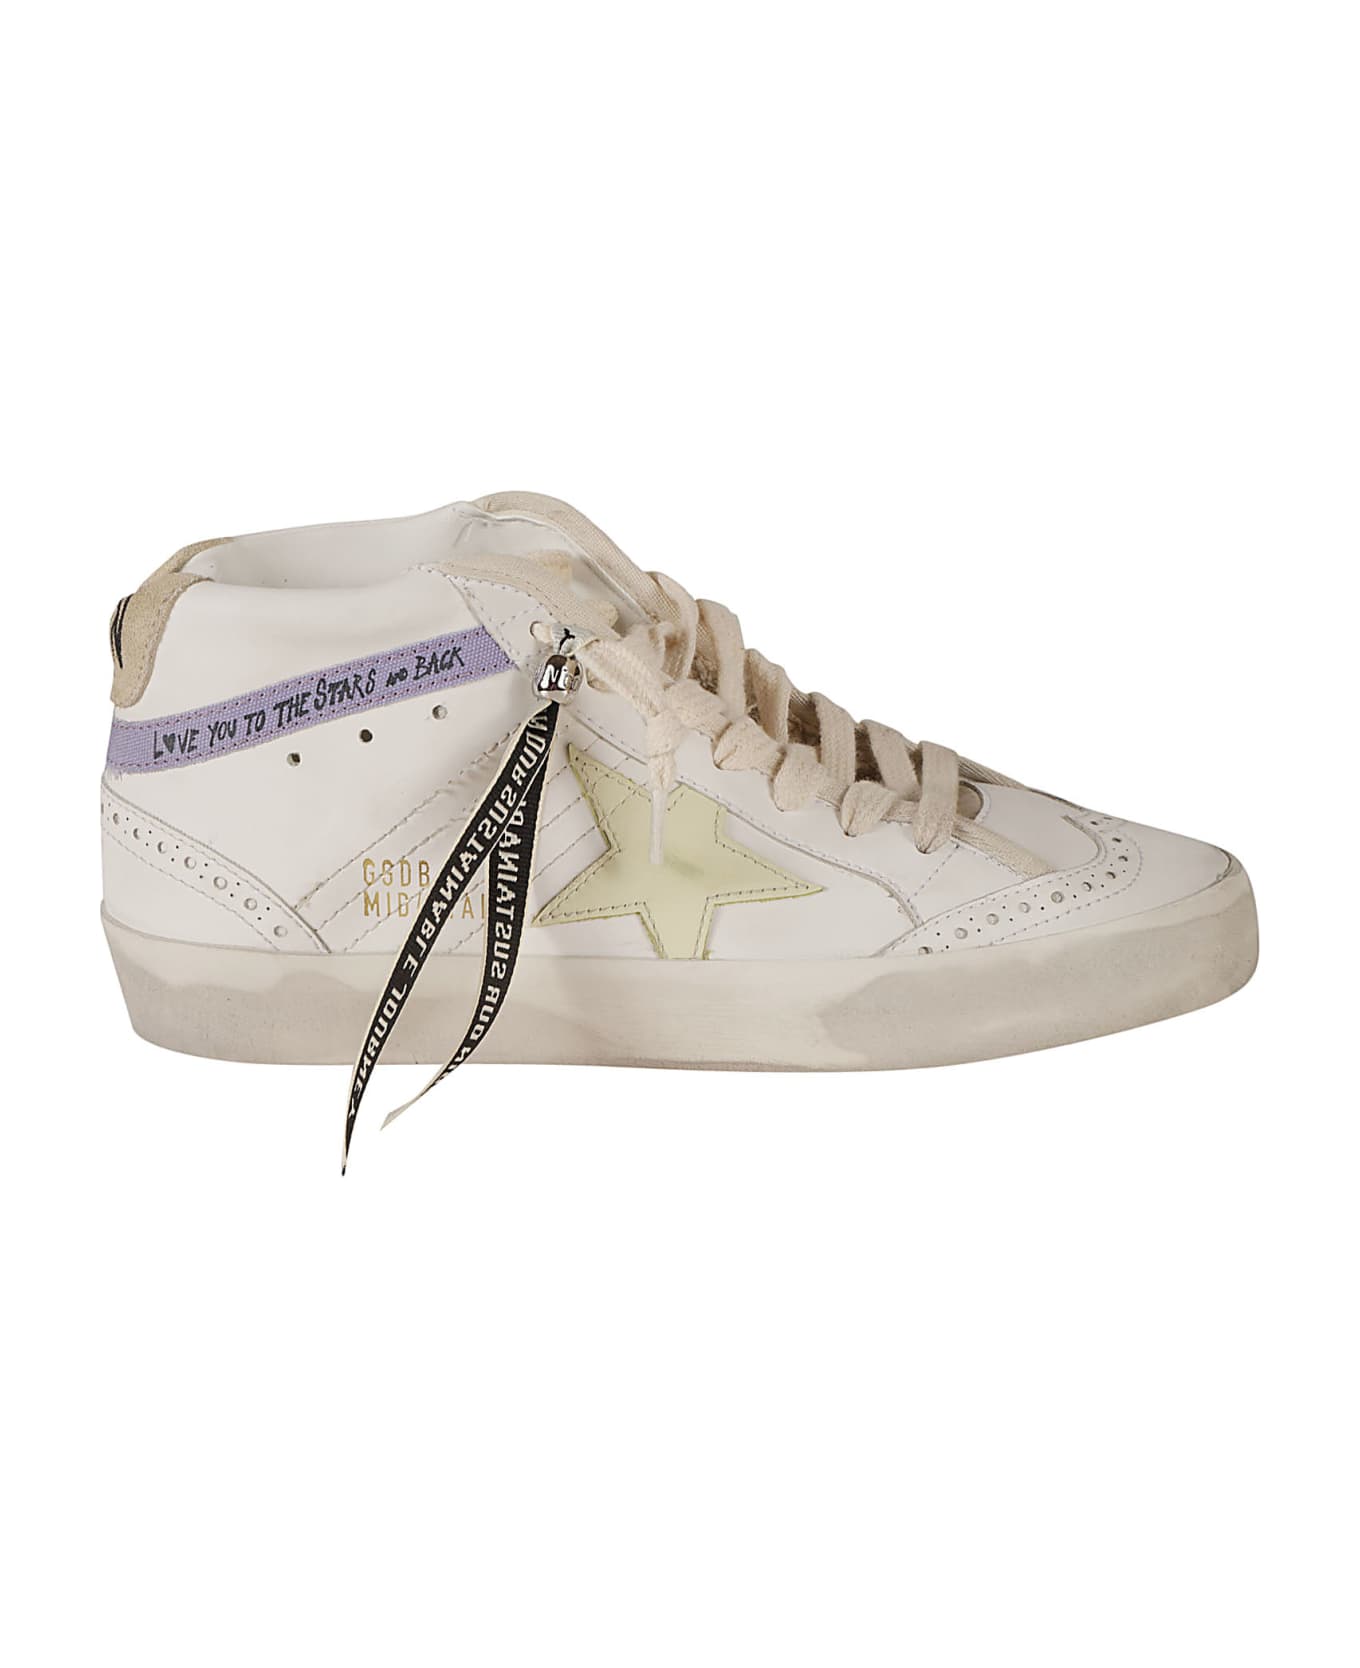 Golden Goose Mid Star Classic Sneakers - White/Beige/Light Yellow